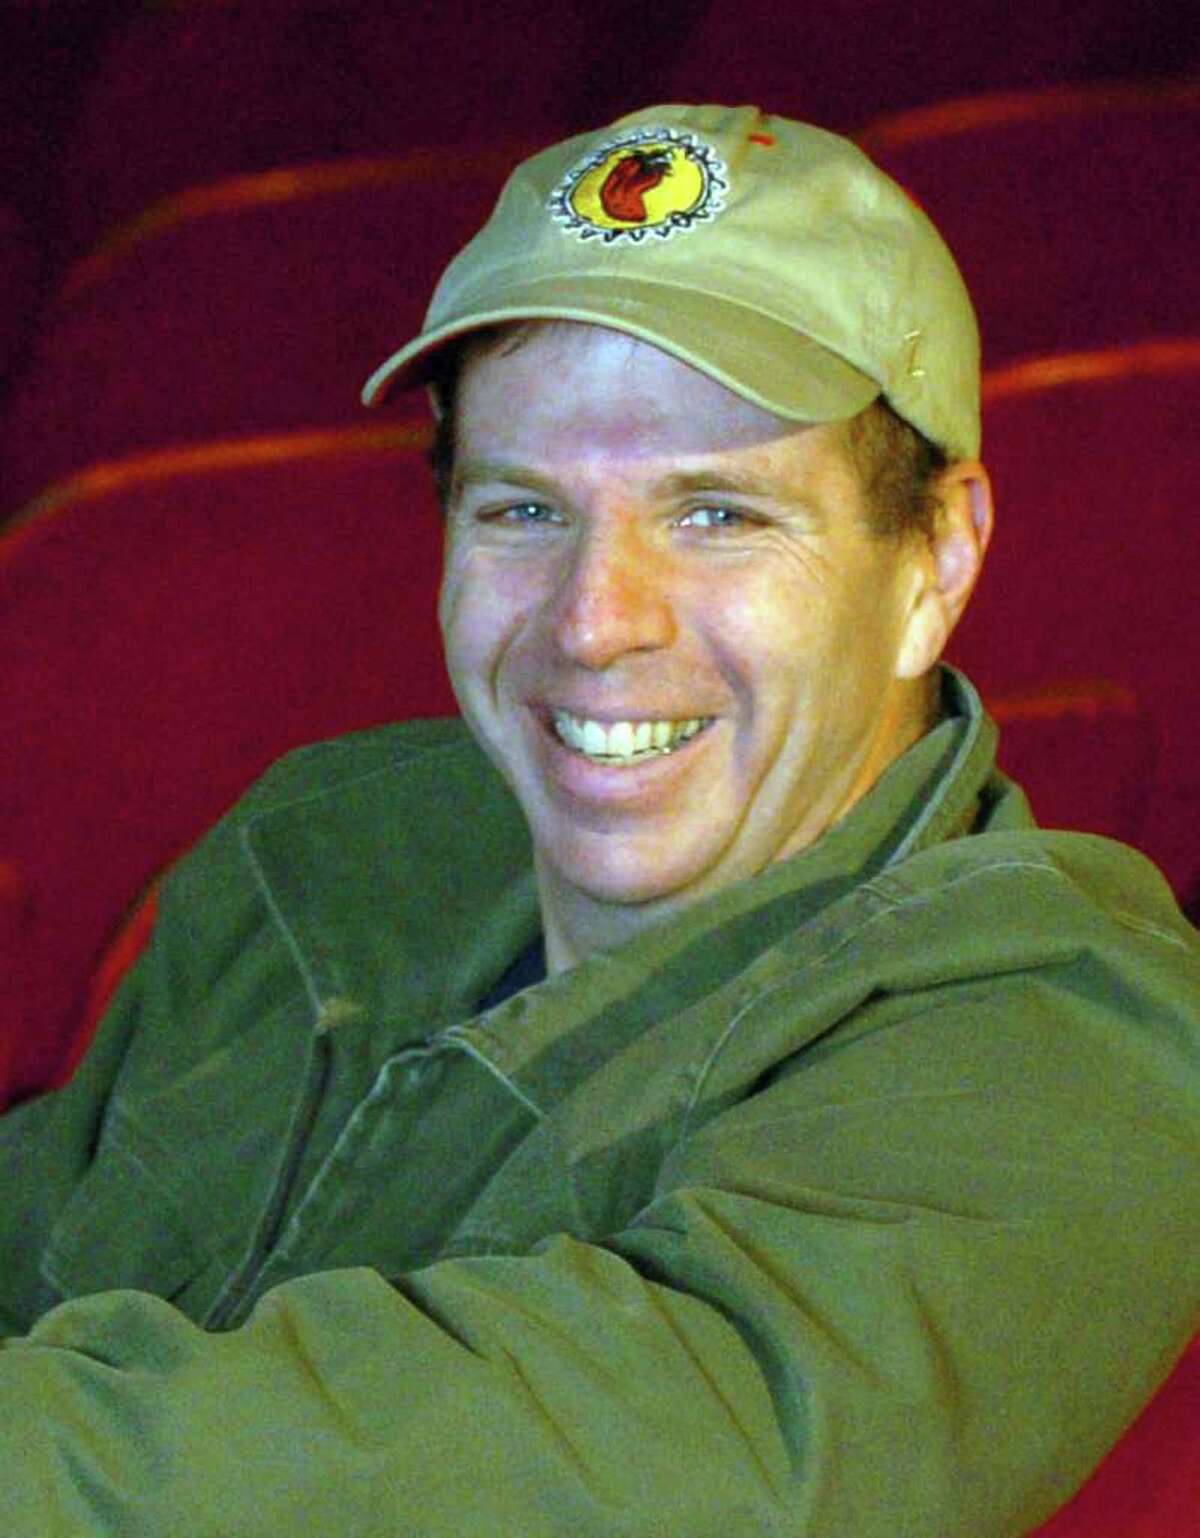 Tom Carruthers, of the Connecticut Film Festival, at The Palace Theater in Danbury April 28, 2010.